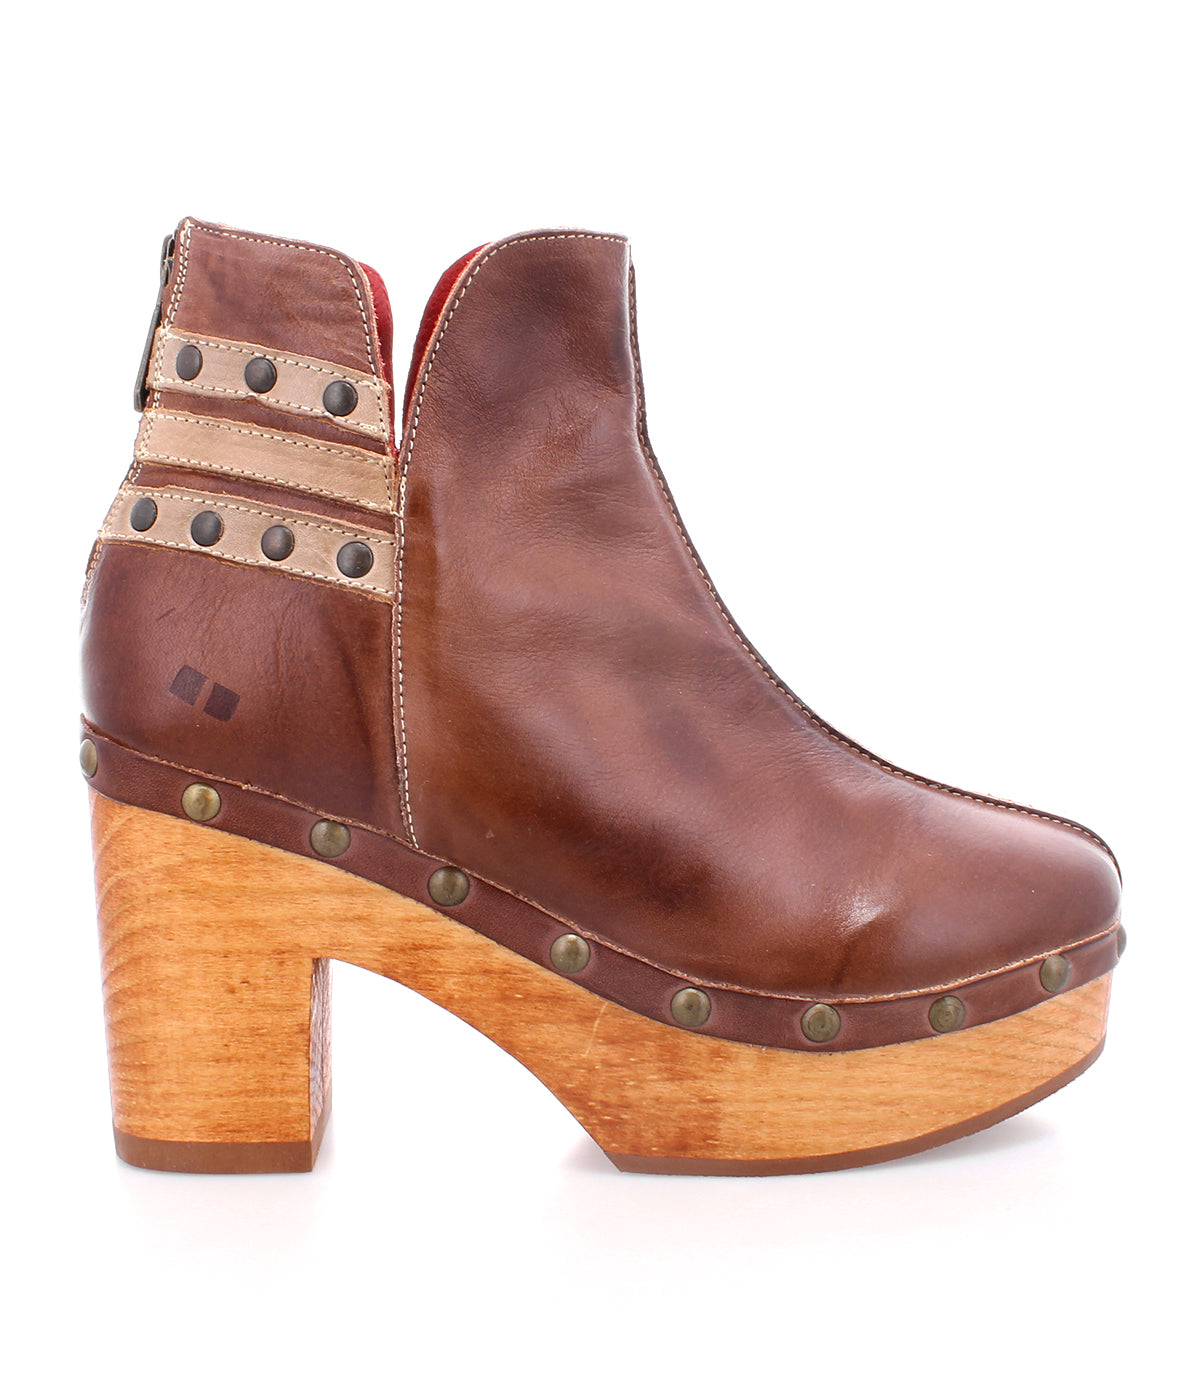 A luxury women's leather bootie with wooden platform in a brown shade, the Viena by Bed Stu.